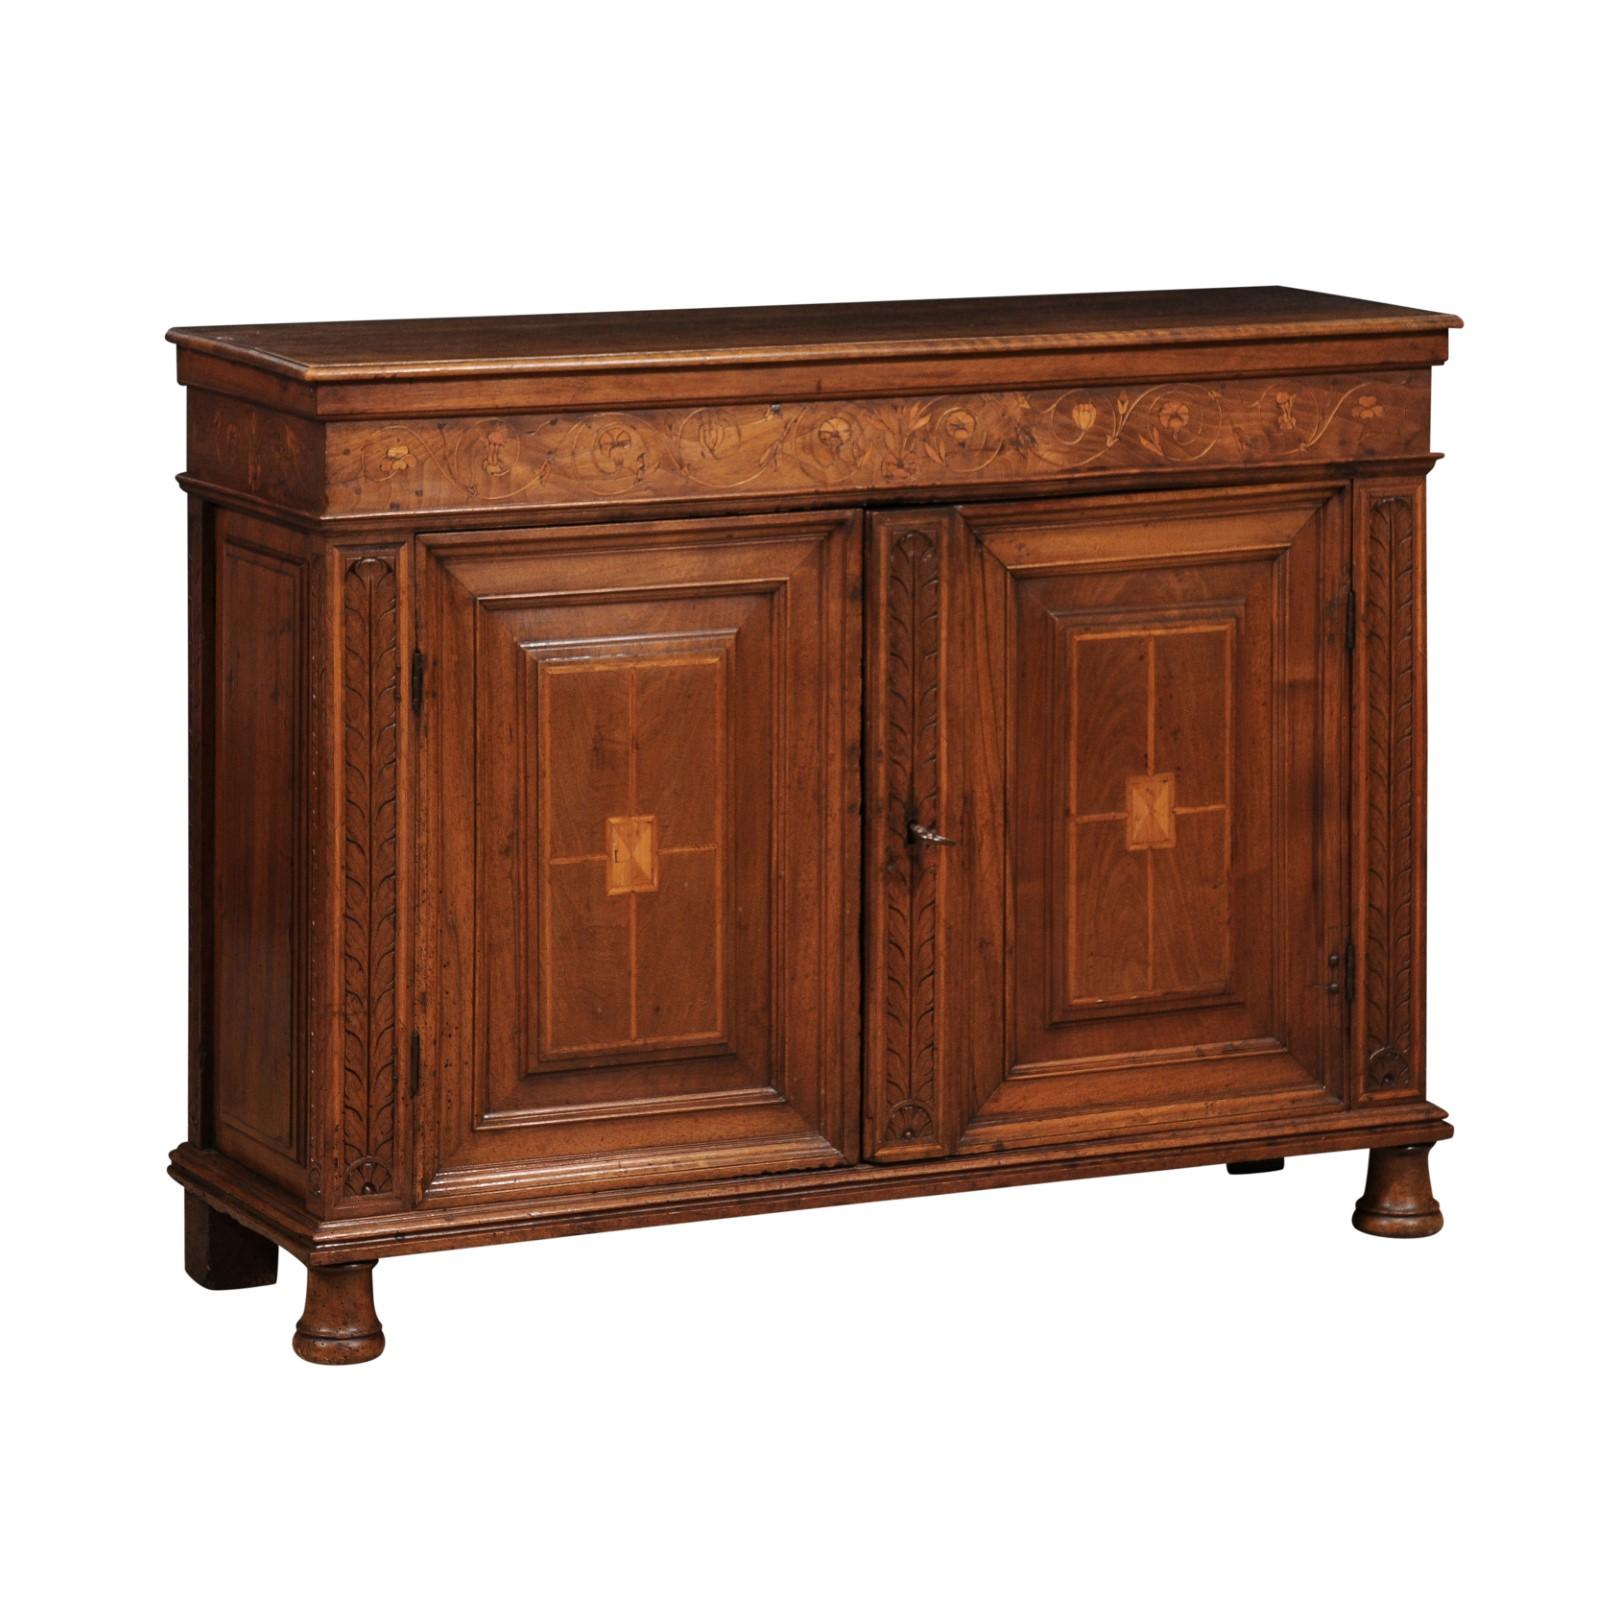 An Italian walnut buffet from circa 1620 with floral marquetry scrollwork made of lighter walnut and maple. This exquisite Italian walnut buffet, originating from circa 1620, is a true testament to the craftsmanship and artistic expression of the